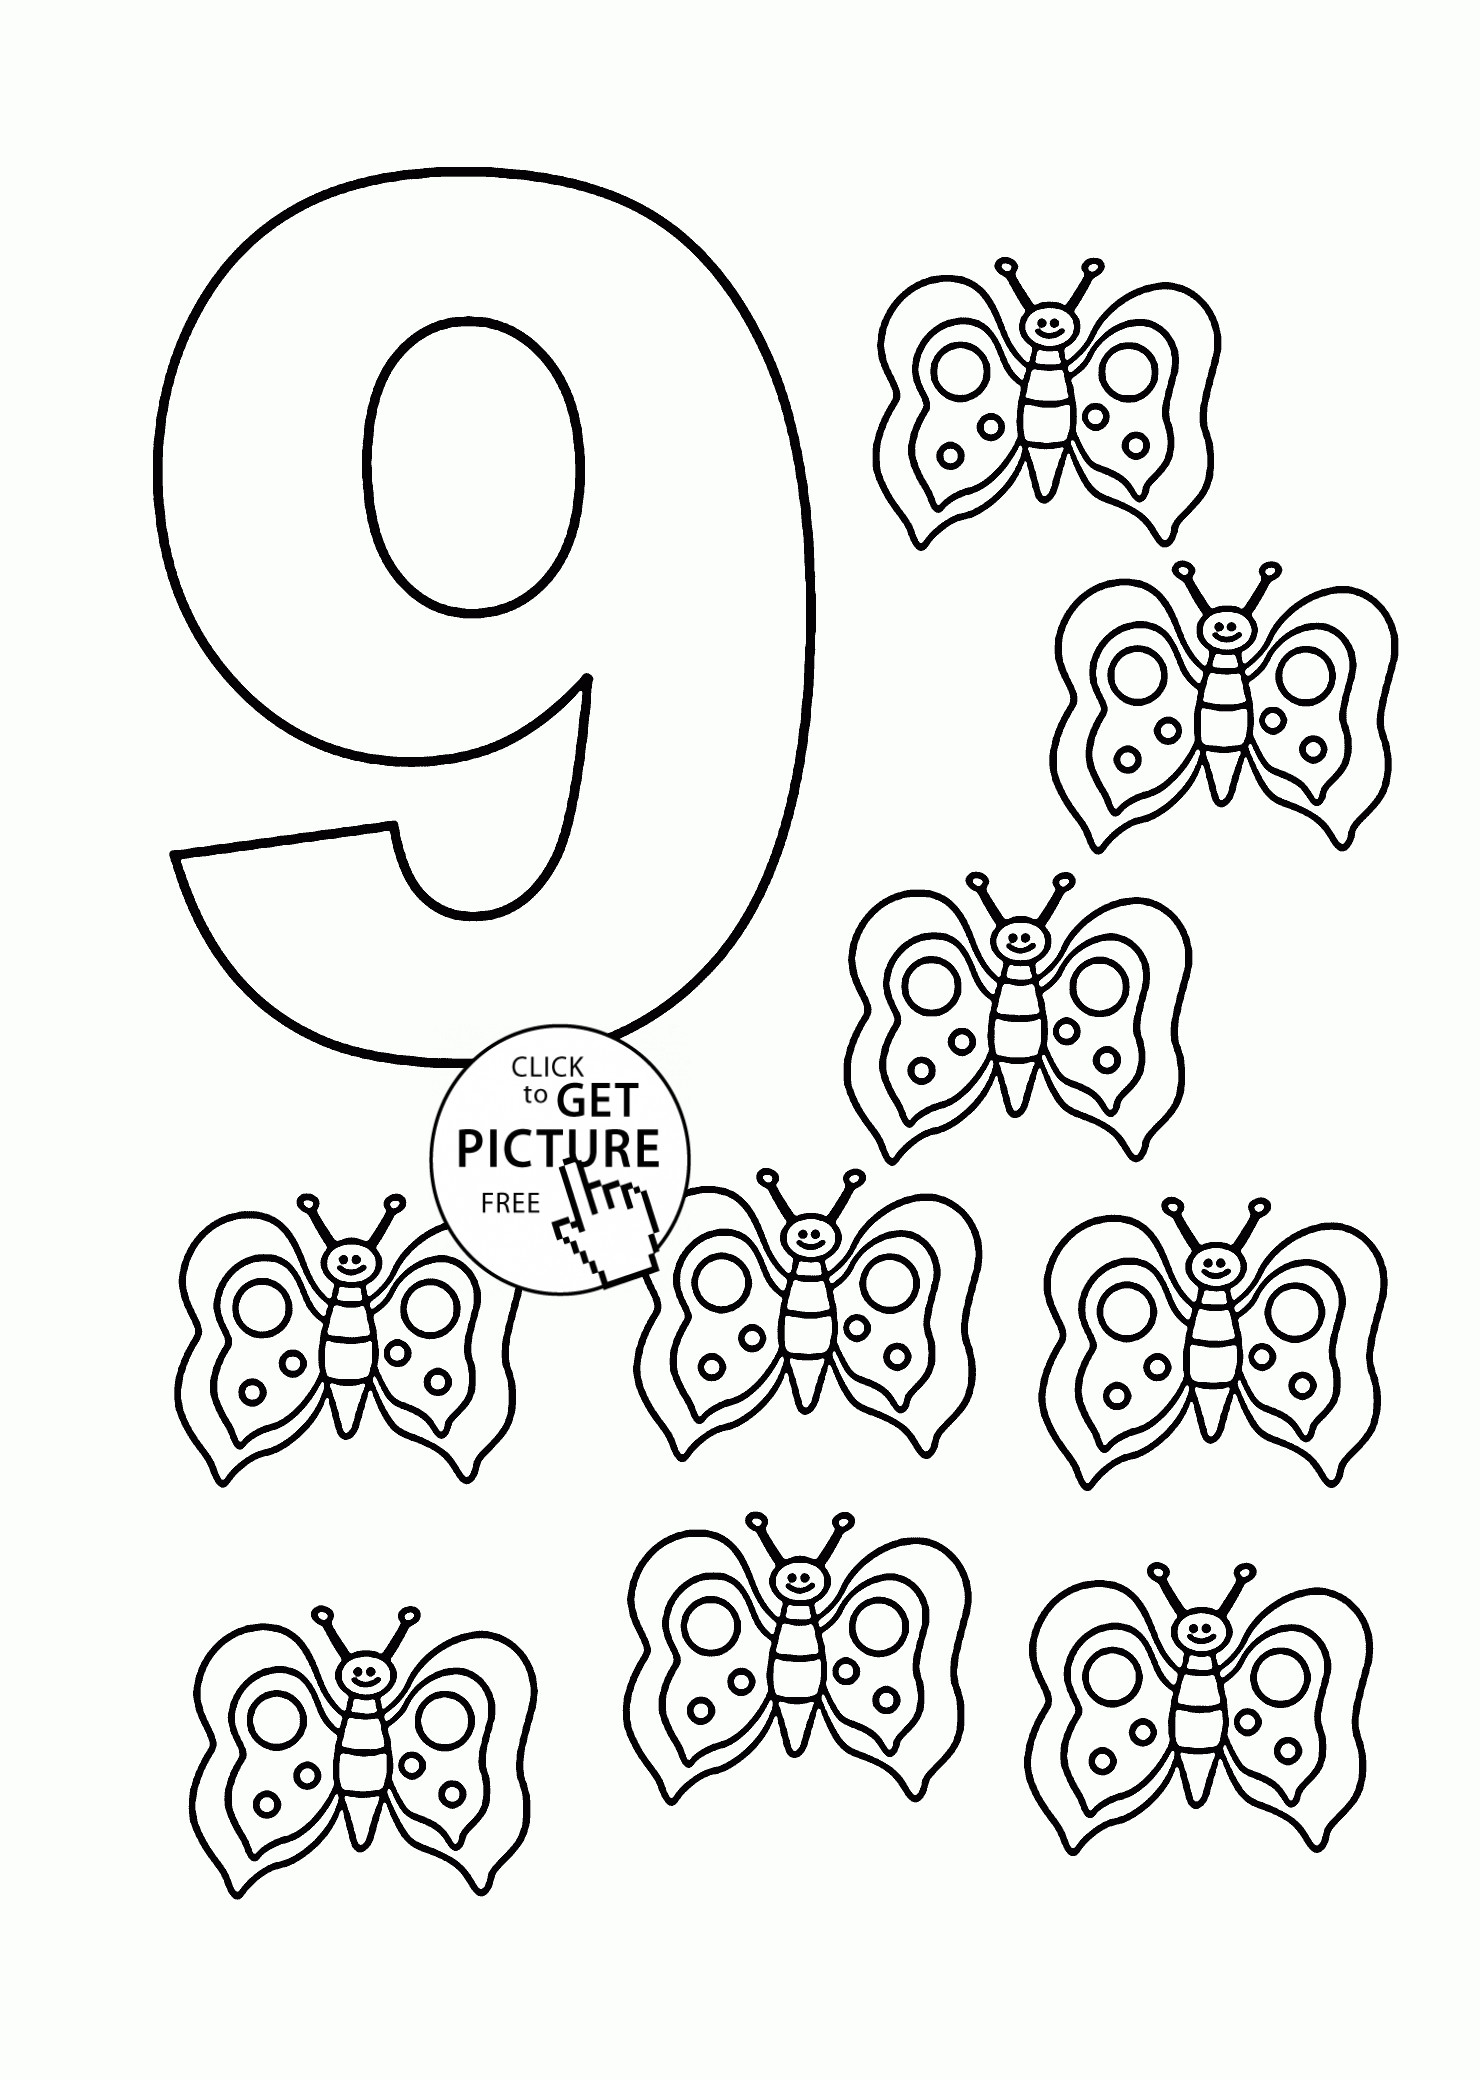 Preschool Coloring Sheets For The N And The Number 9
 Number 9 coloring pages for kids counting sheets